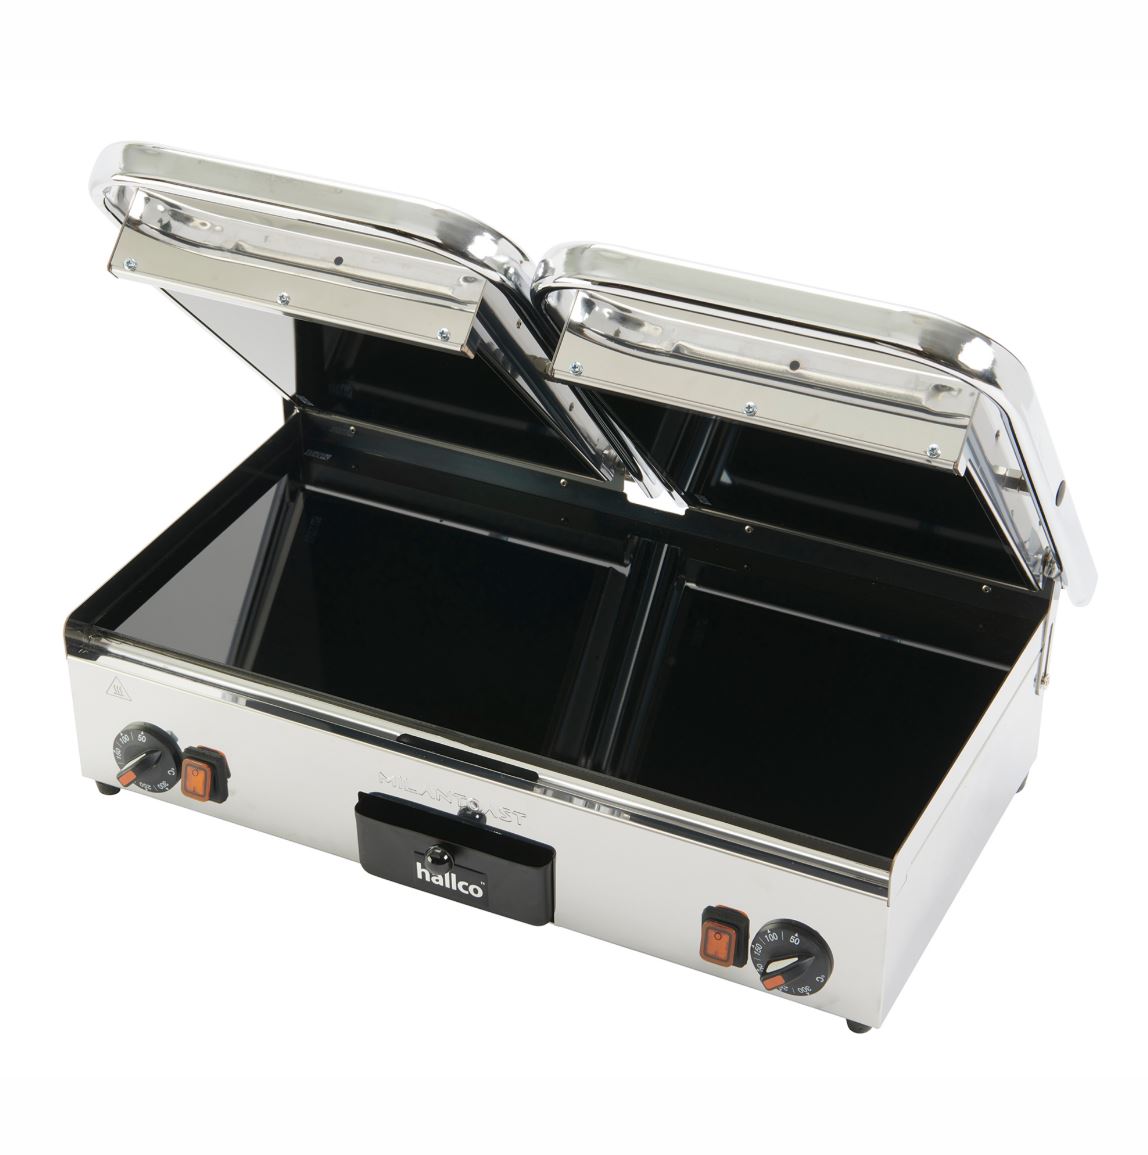 Hallco MEMT17060 Ceramic Flat Top & Bottom Double Contact Grill